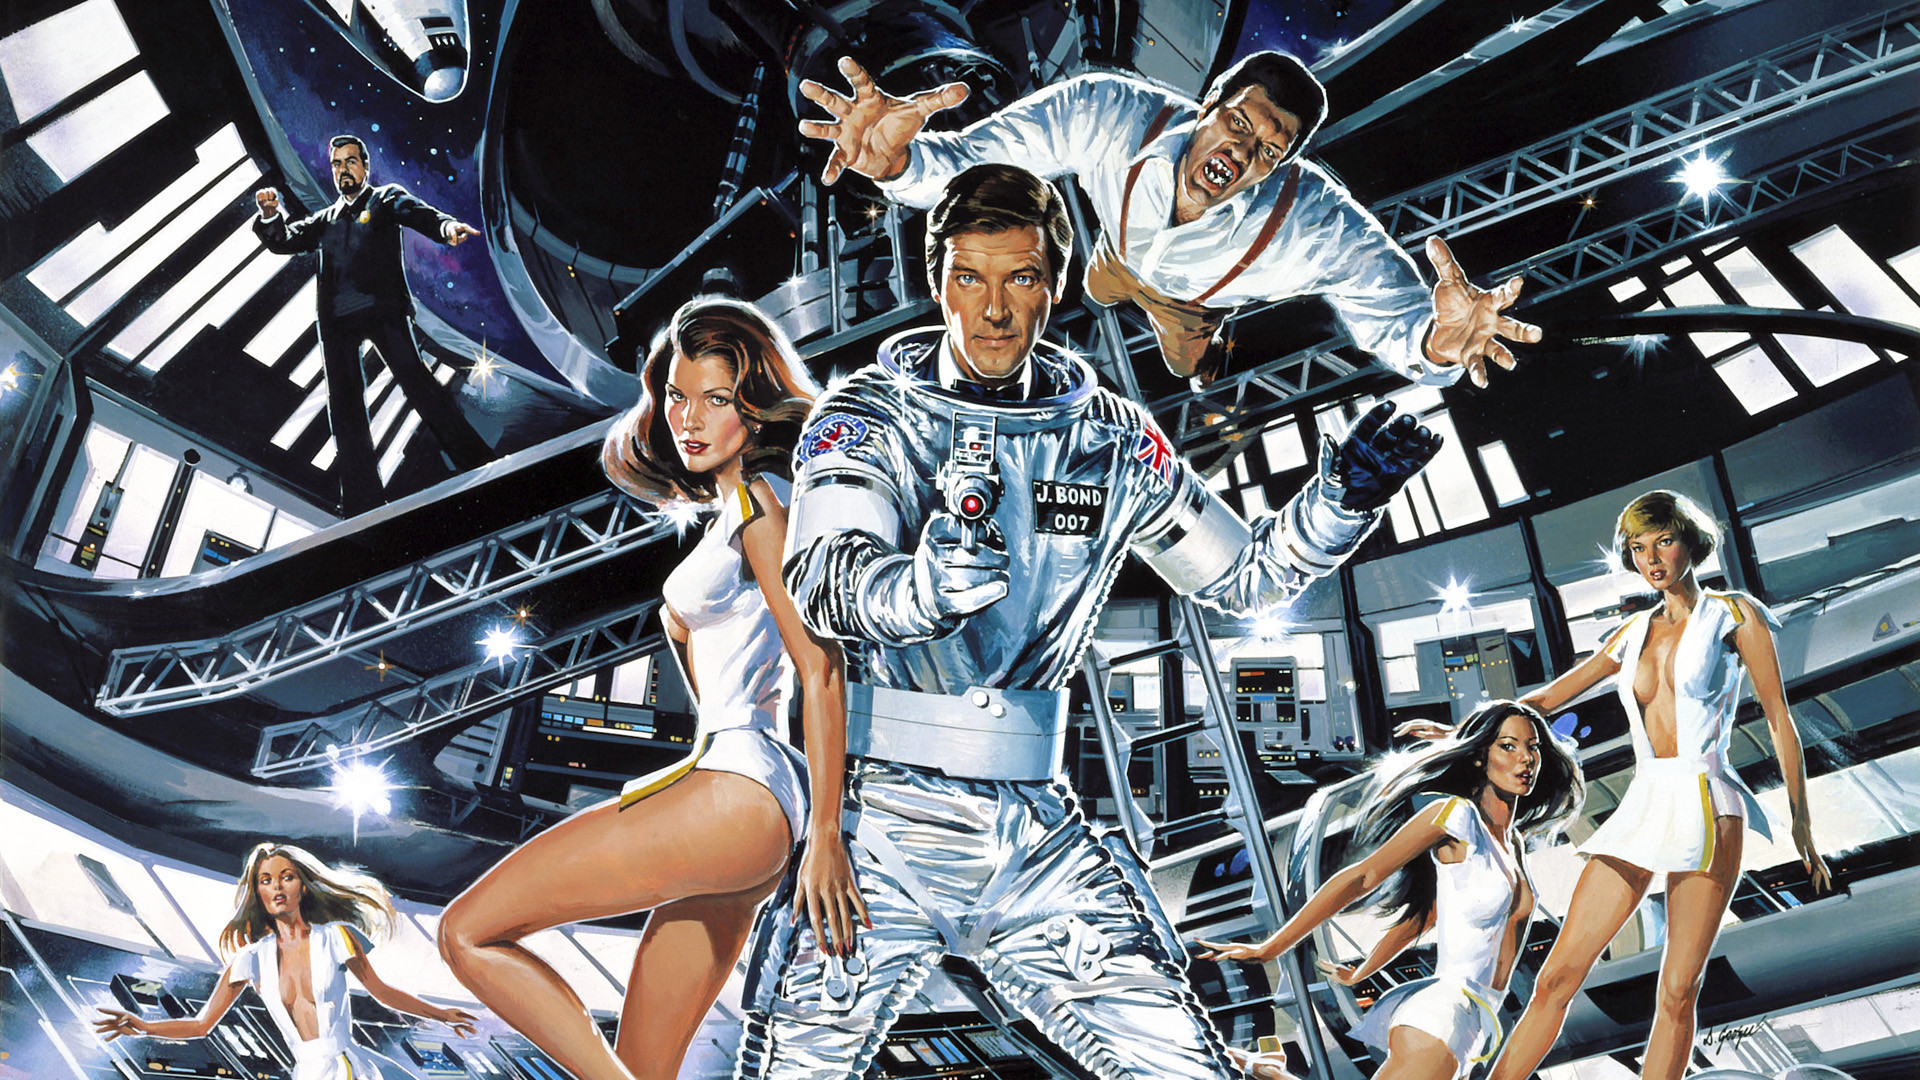 Amazing Moonraker Pictures & Backgrounds